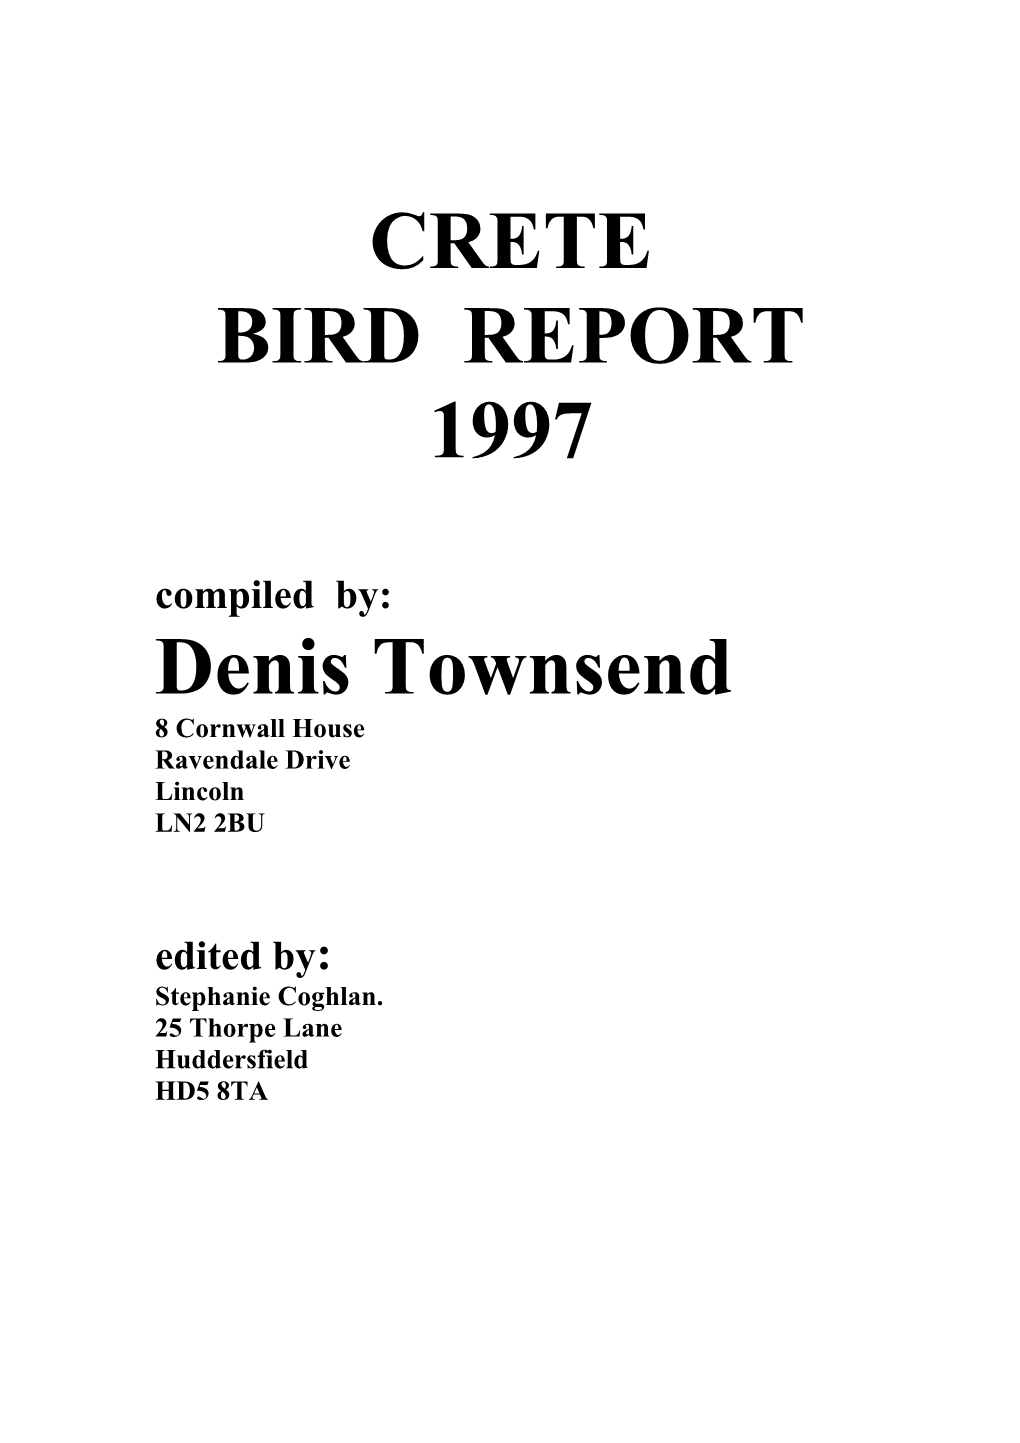 CRETE BIRD REPORT 1997 Compiled By: Denis Townsend 8 Cornwall House Ravendale Drive Lincoln LN2 2BU Edited By: Stephanie Coghlan